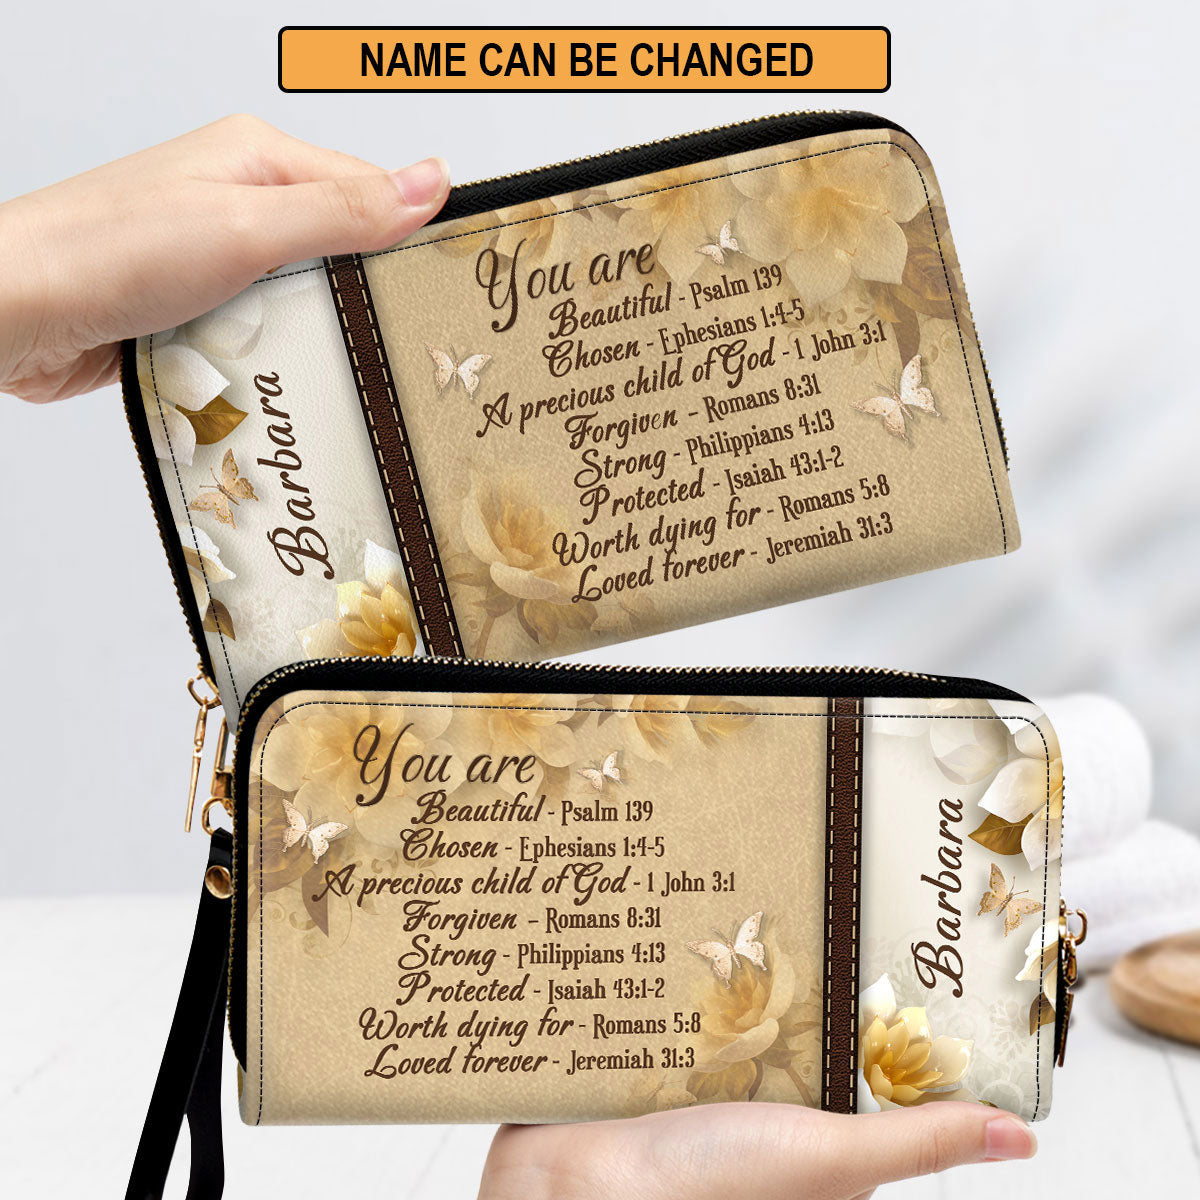 Butterfly A Precious Child Of God Clutch Purse For Women - Personalized Name - Christian Gifts For Women